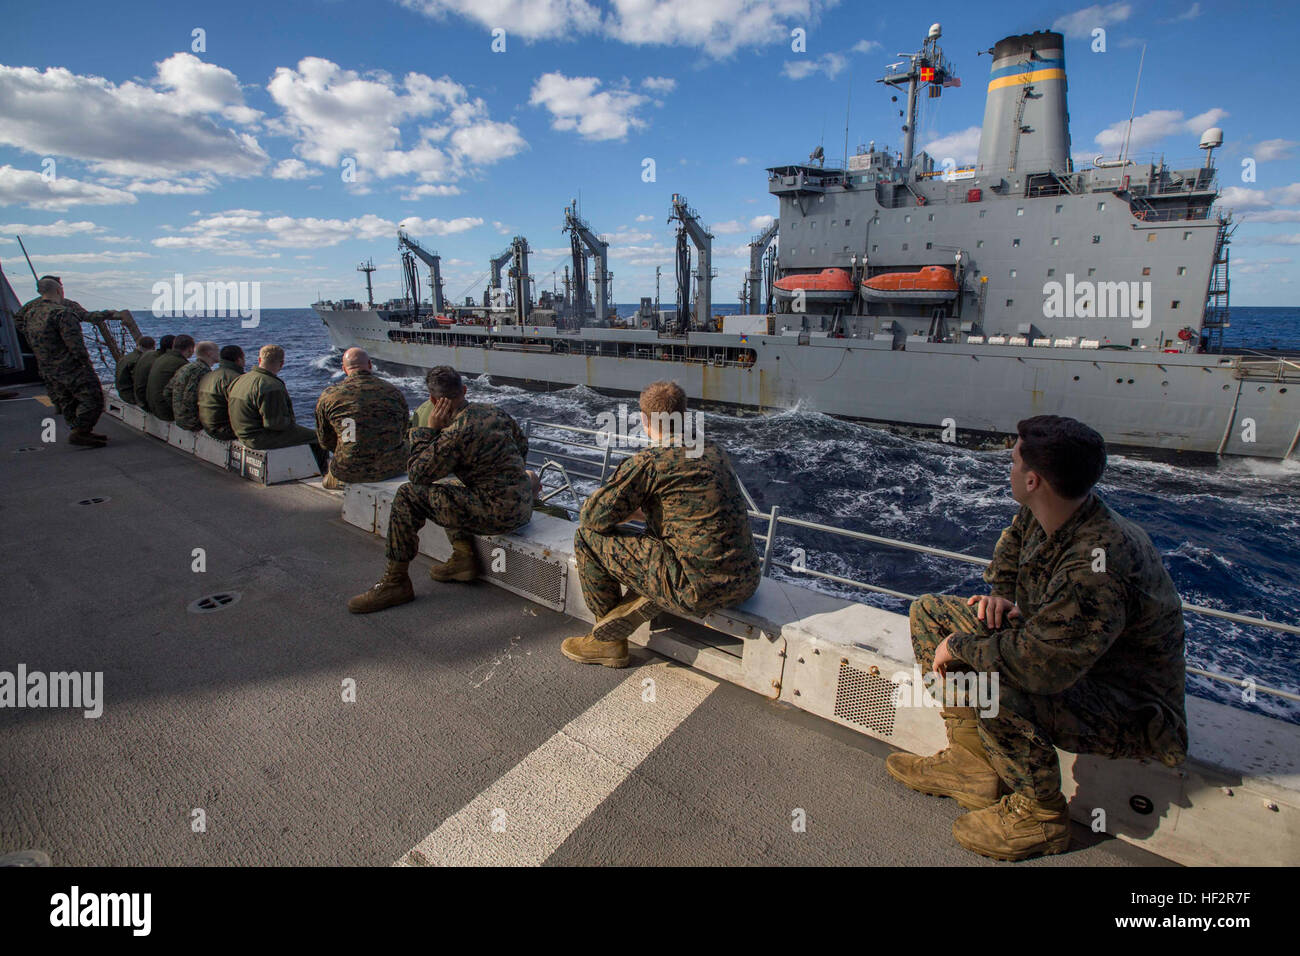 Marines with the 24th Marine Expeditionary Unit watch as the USNS Kanawha maneuver itself into position in preparation for a replenishment-at-sea aboard the USS New York, Dec. 30, 2014. The 24th MEU and Iwo Jima Amphibious Ready Group are conducting naval operations in the U.S. 6th Fleet area of operations in support of U.S. national security interests in Europe. (U.S. Marine Corps photo by Cpl. Todd F. Michalek) 24th Marine Expeditionary Unit Participates in Resupply-At-Sea Operations Aboard USS New York 141230-M-YH418-001 Stock Photo